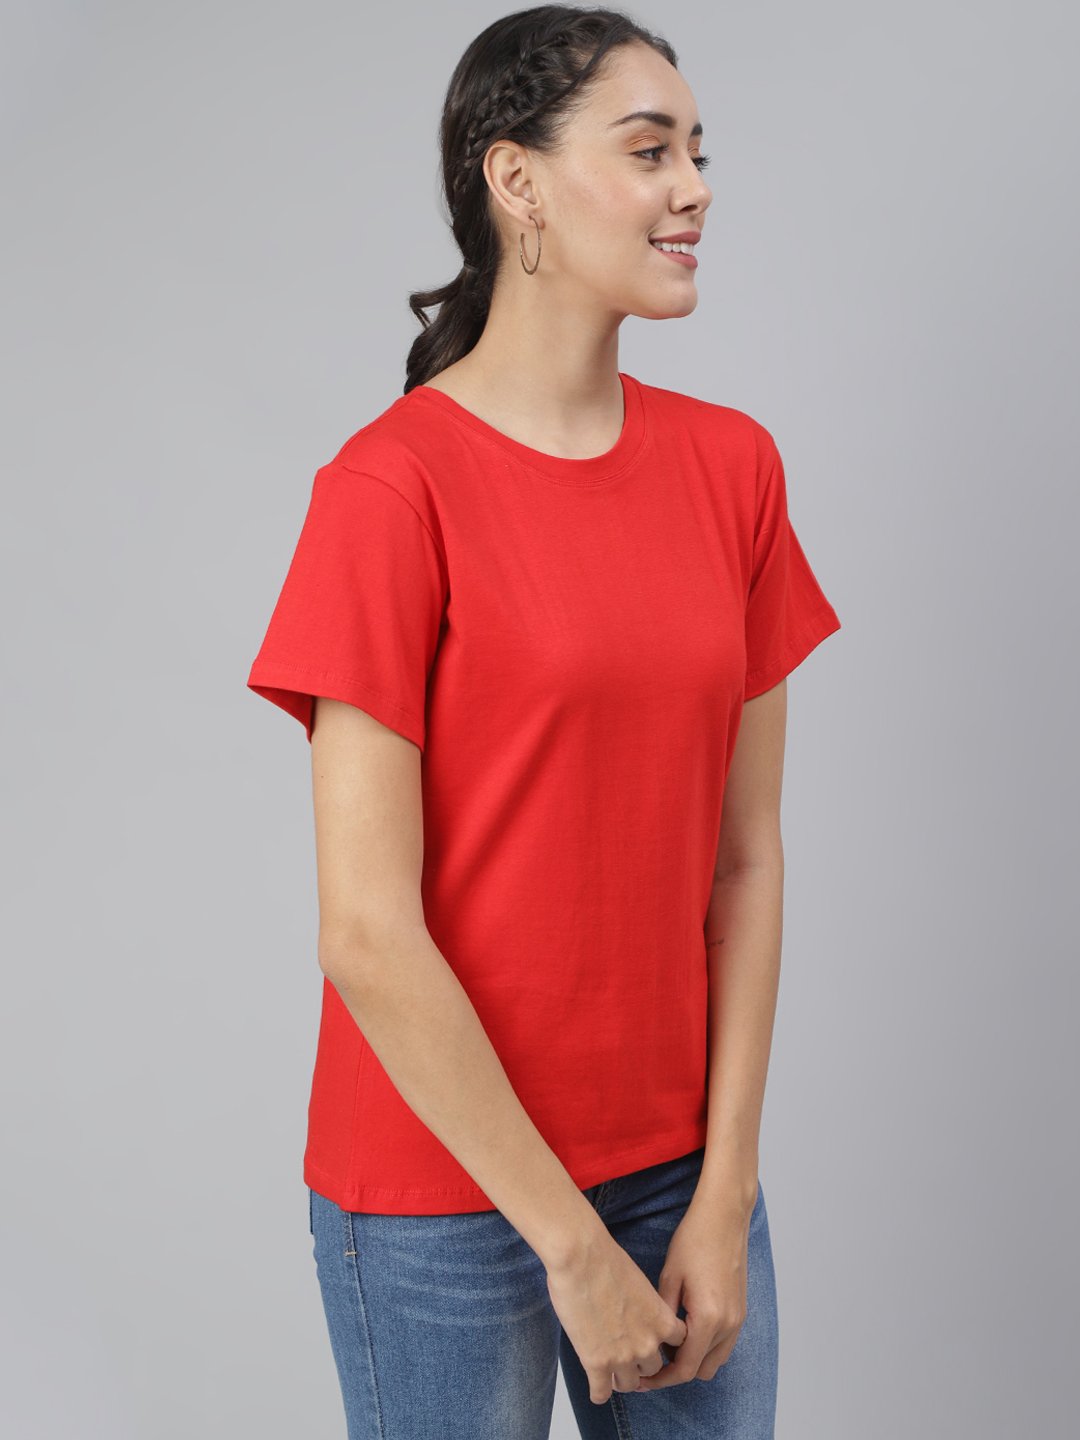 SCORPIUS Red Loose Fit Tshirt